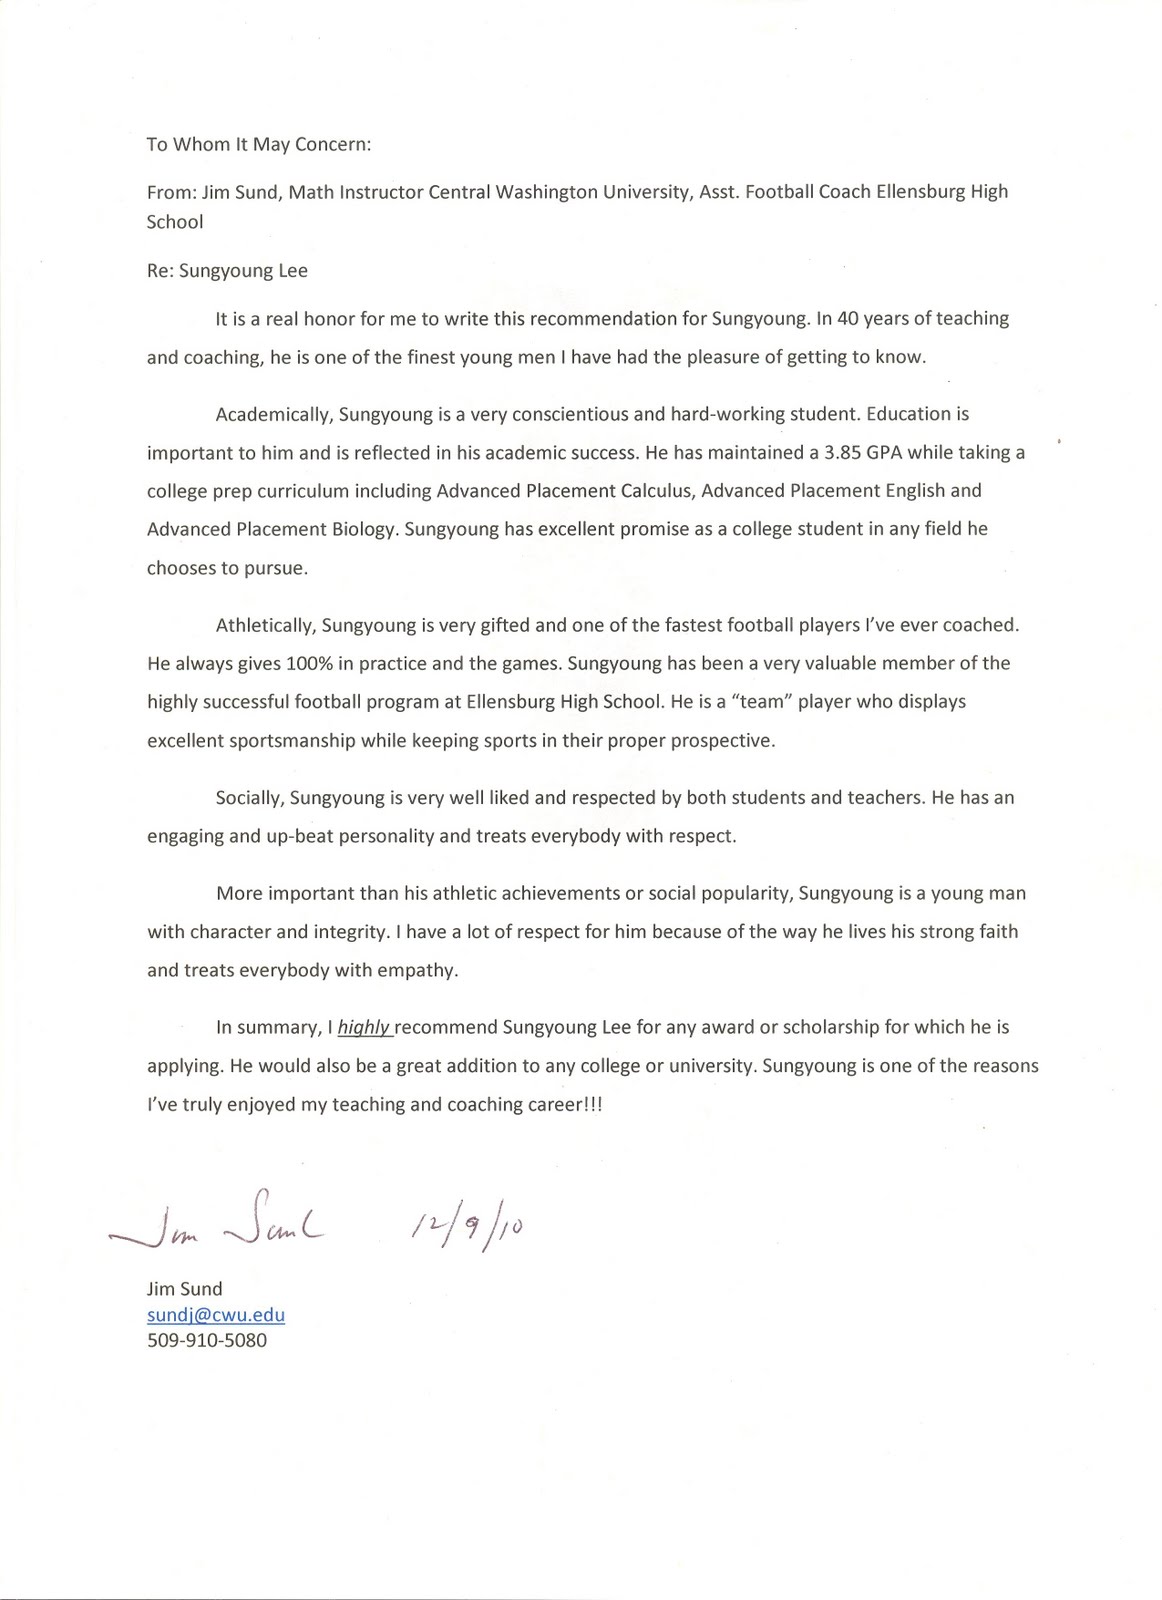 National Junior Honor Society Reference Letter - Find Your In National Junior Honor Society Letter Of Recommendation Template